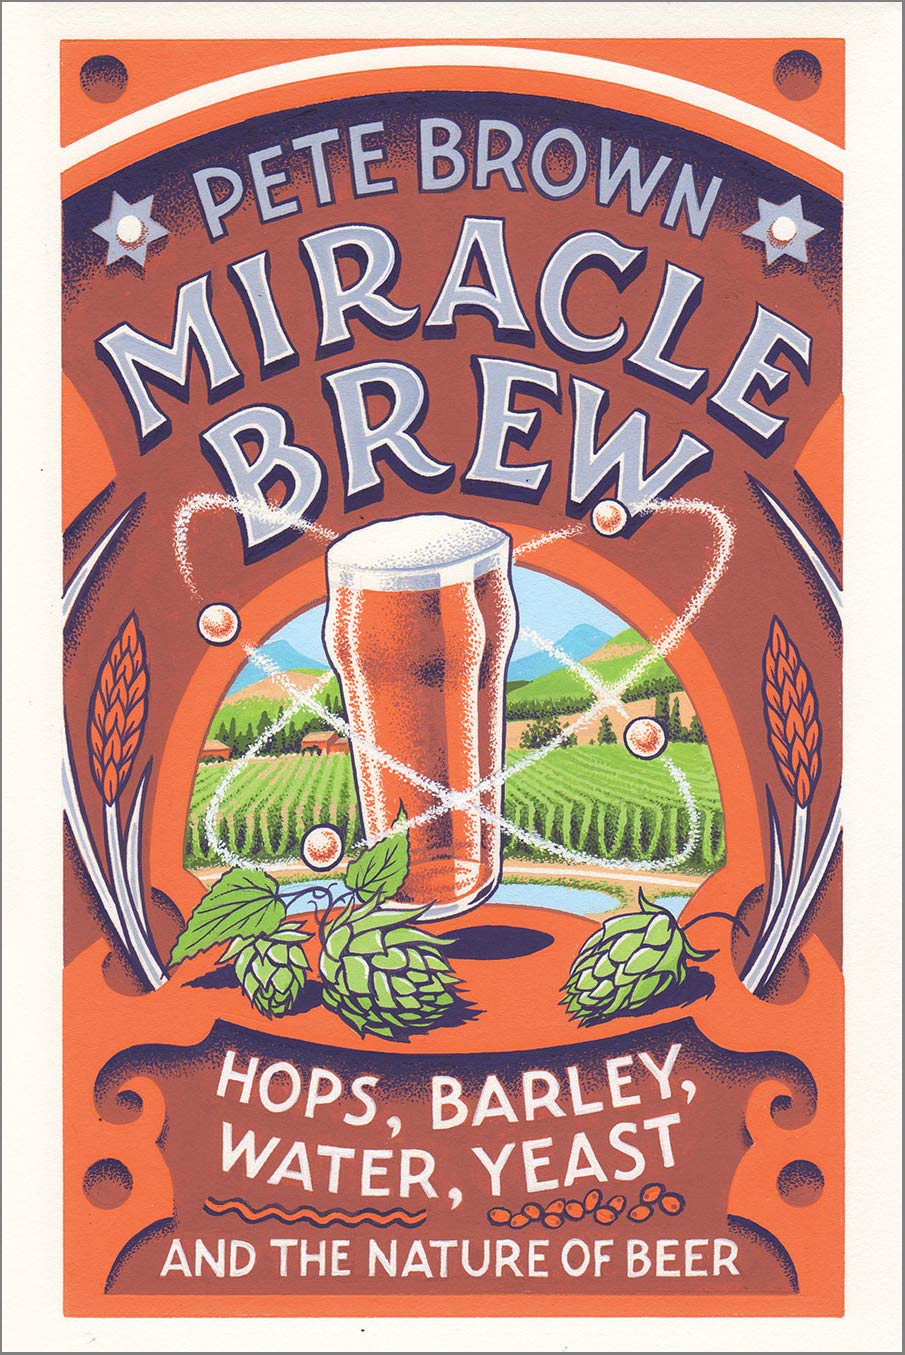 Miracle Brew: Hops, Barley, Water, Yeast, and the Nature of Beer (Pete Brown)